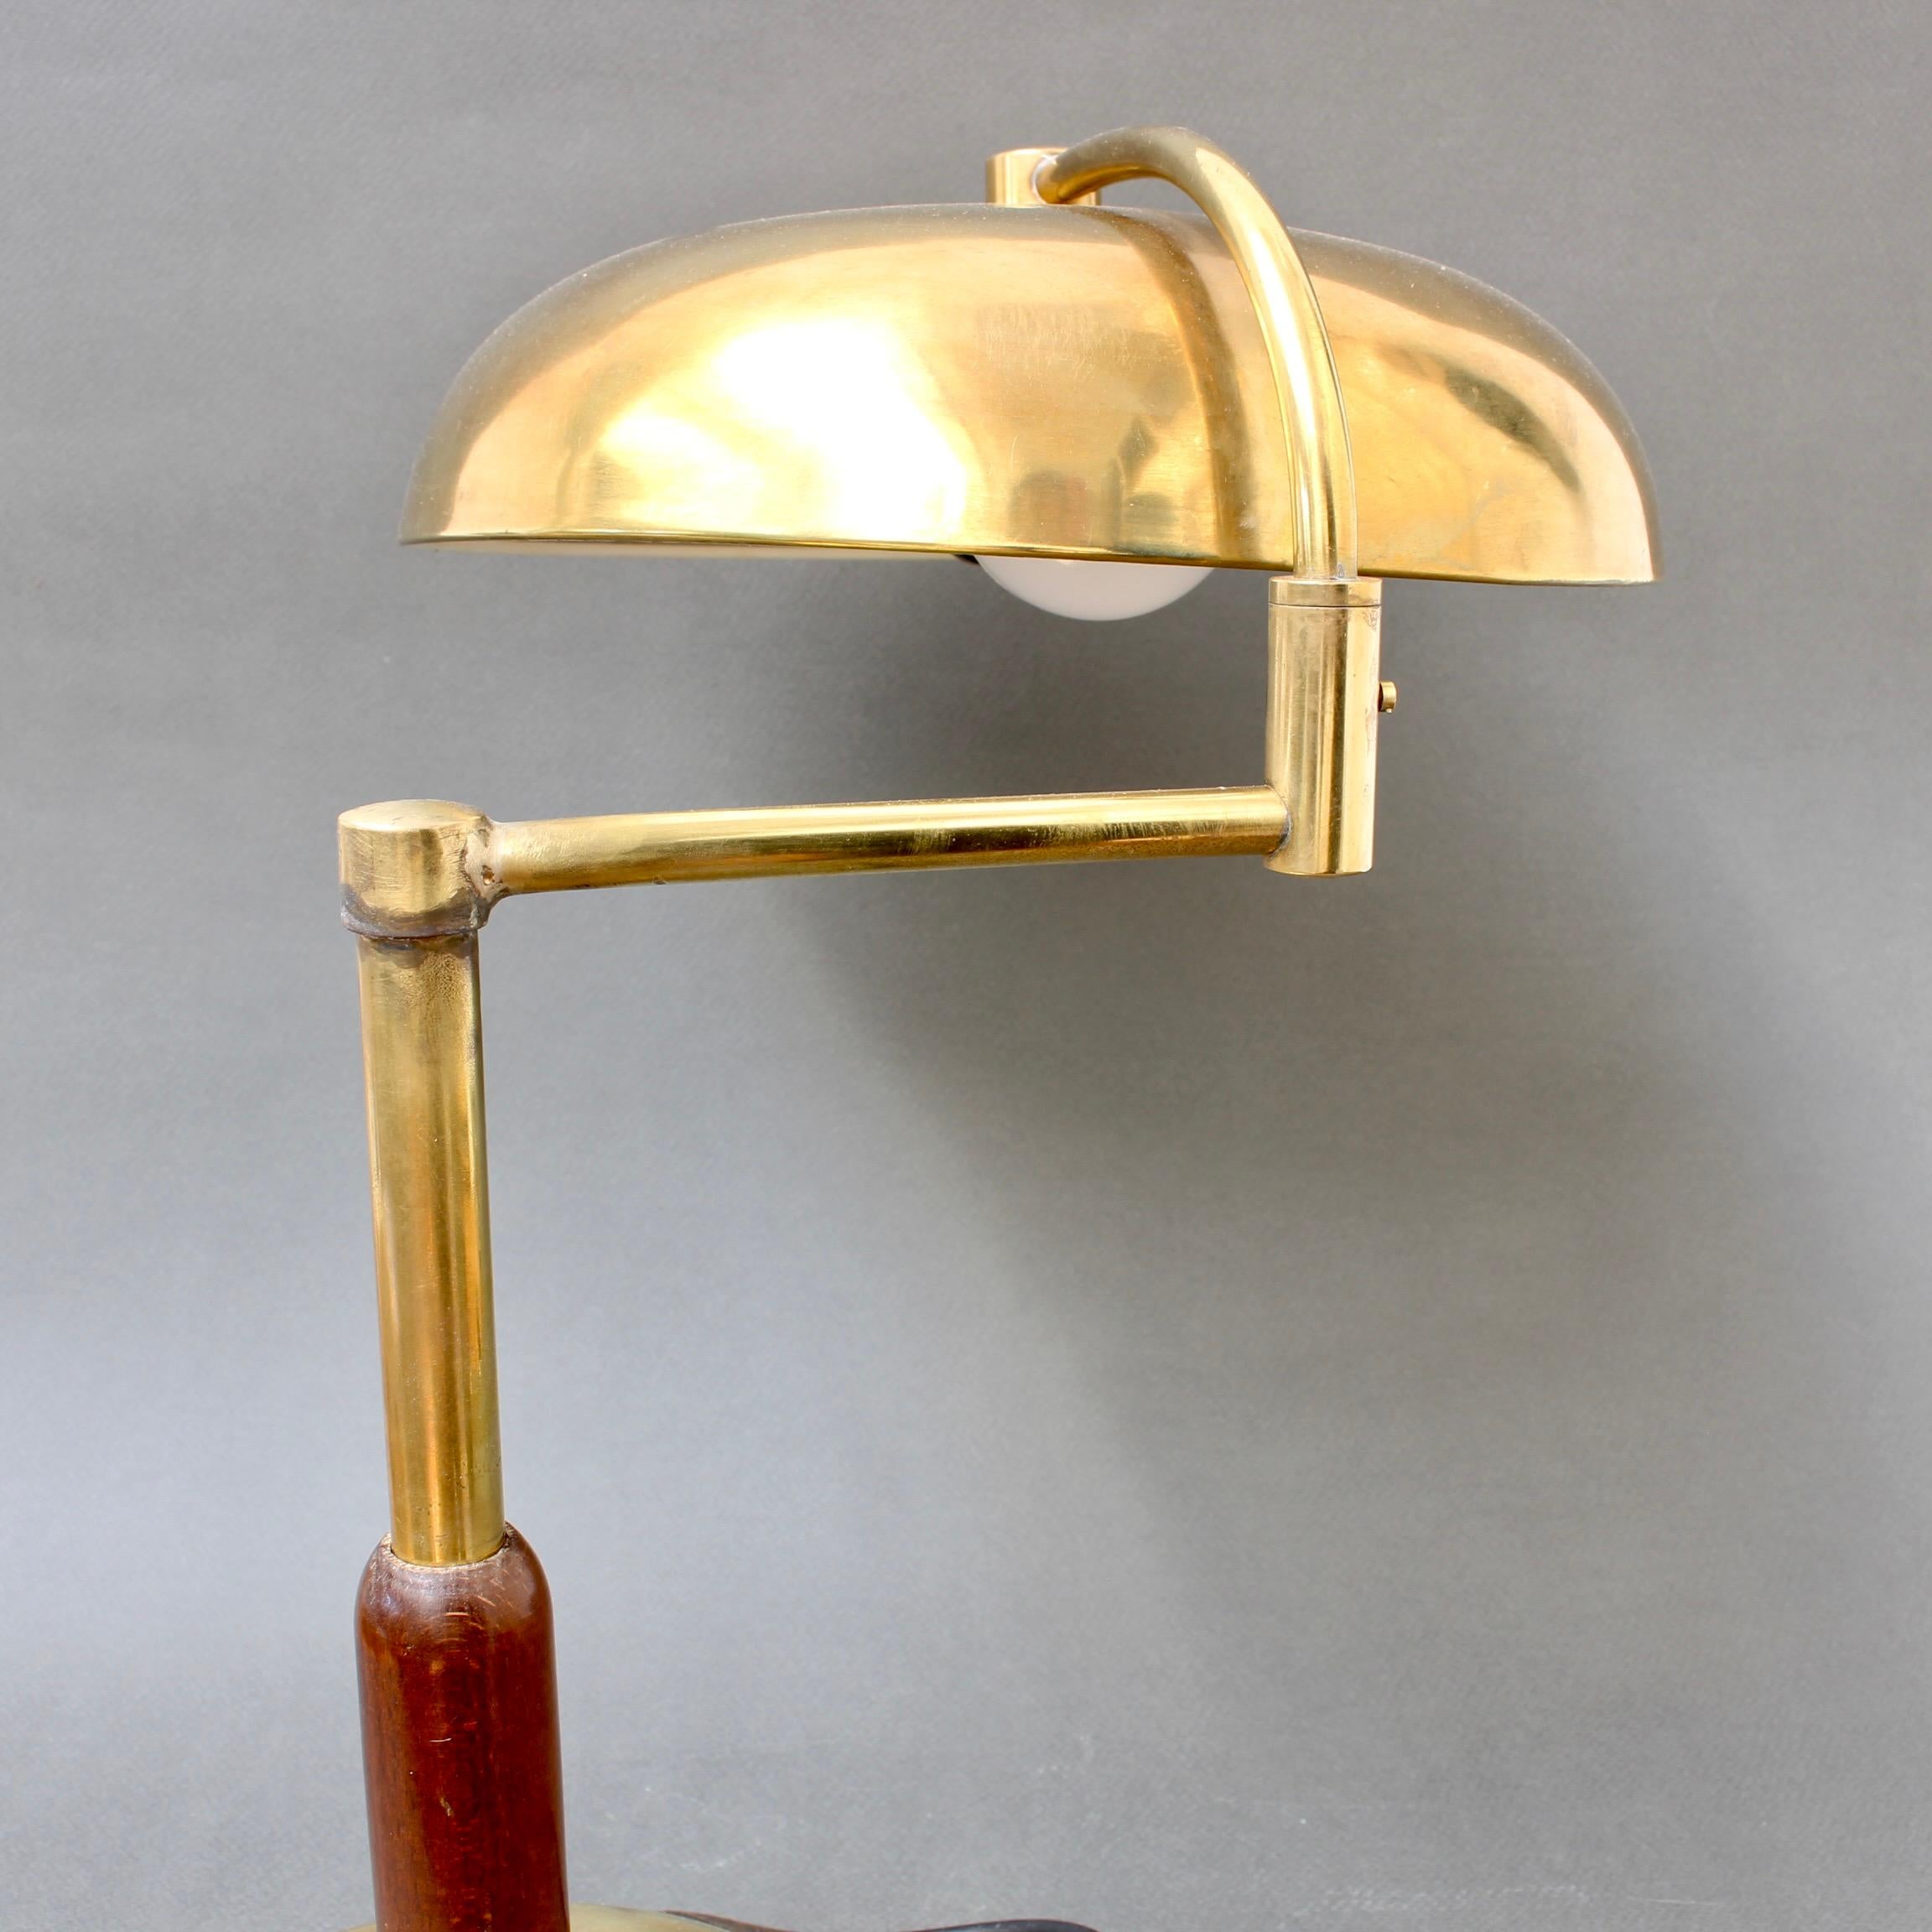 Italian Mid-Century Brass Table Lamp with Swivel Arm, circa 1950s For Sale 1